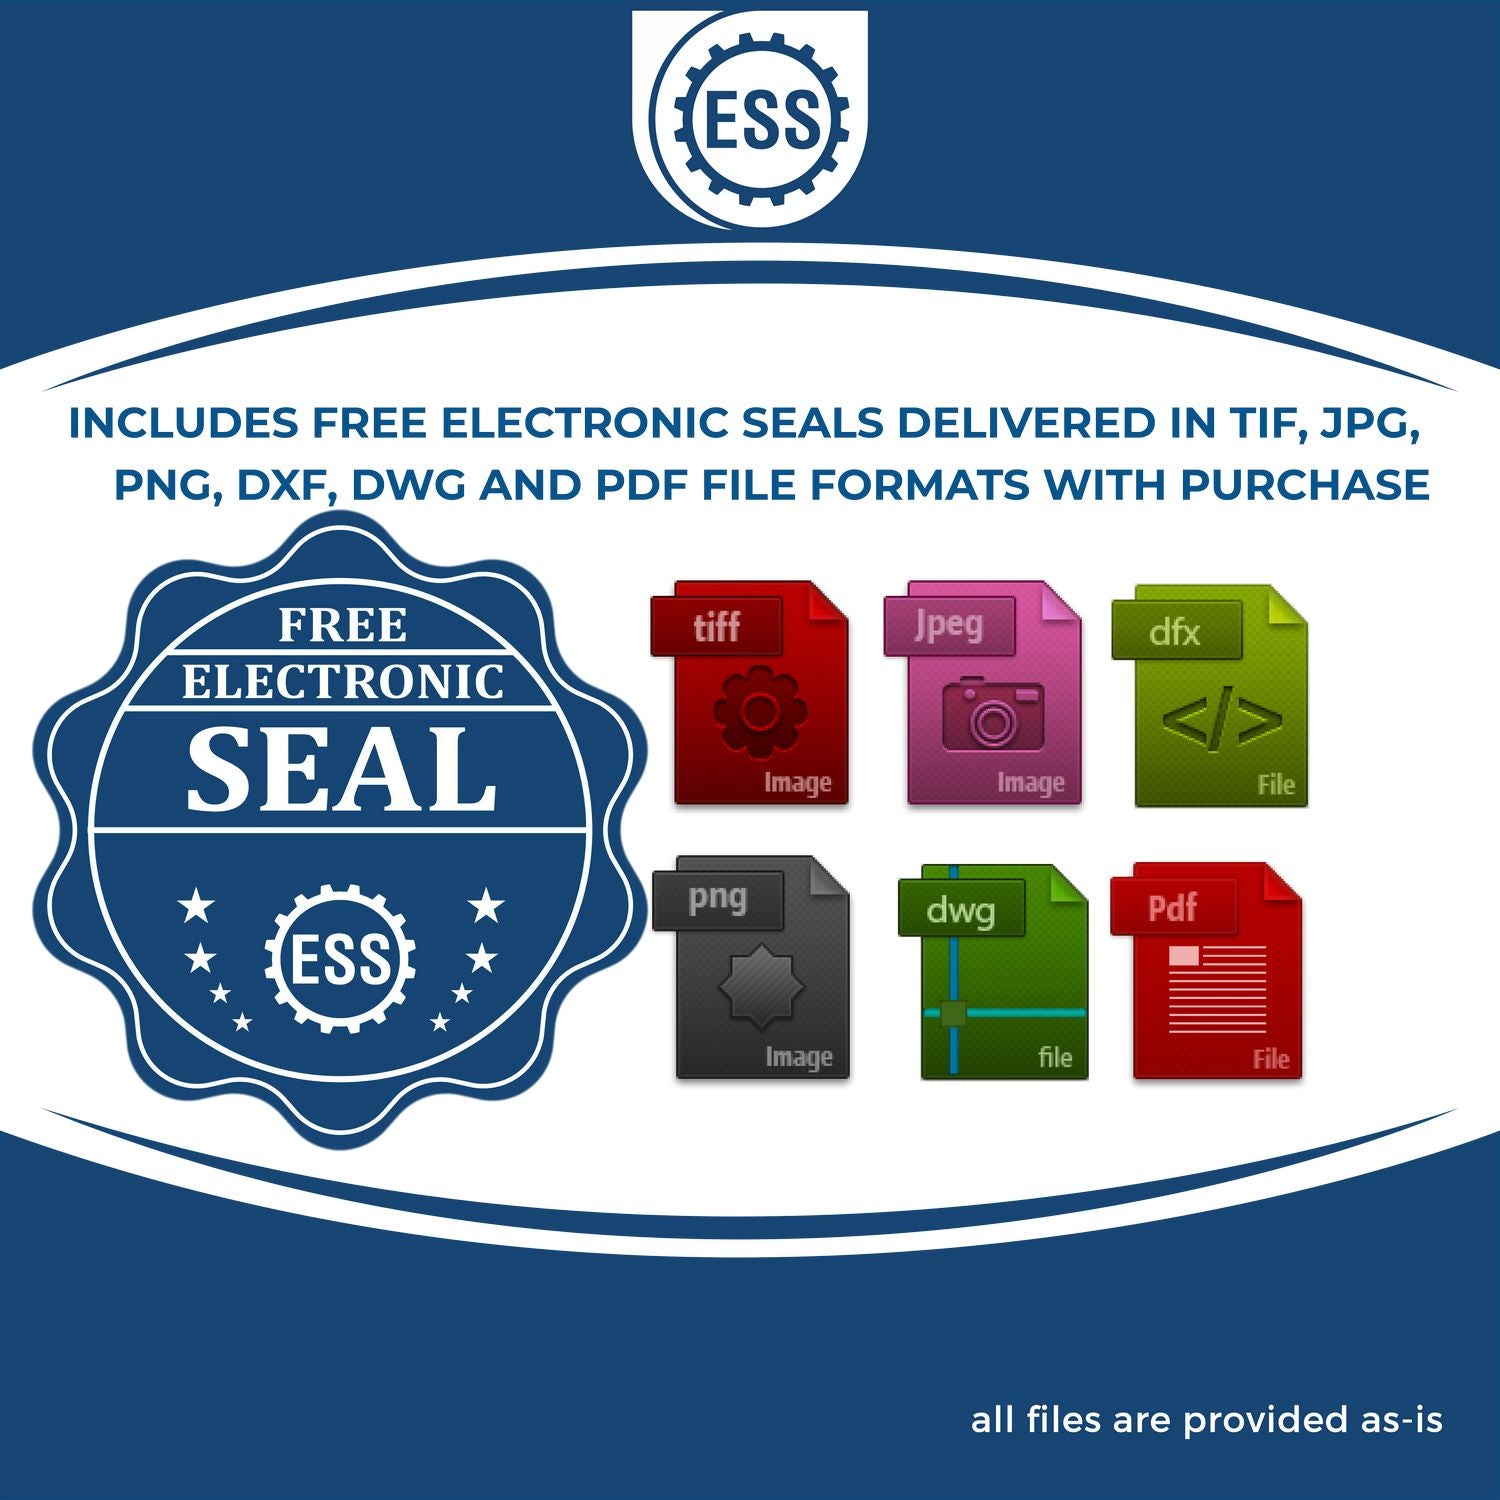 An infographic for the free electronic seal for the Soft Wisconsin Professional Engineer Seal illustrating the different file type icons such as DXF, DWG, TIF, JPG and PNG.